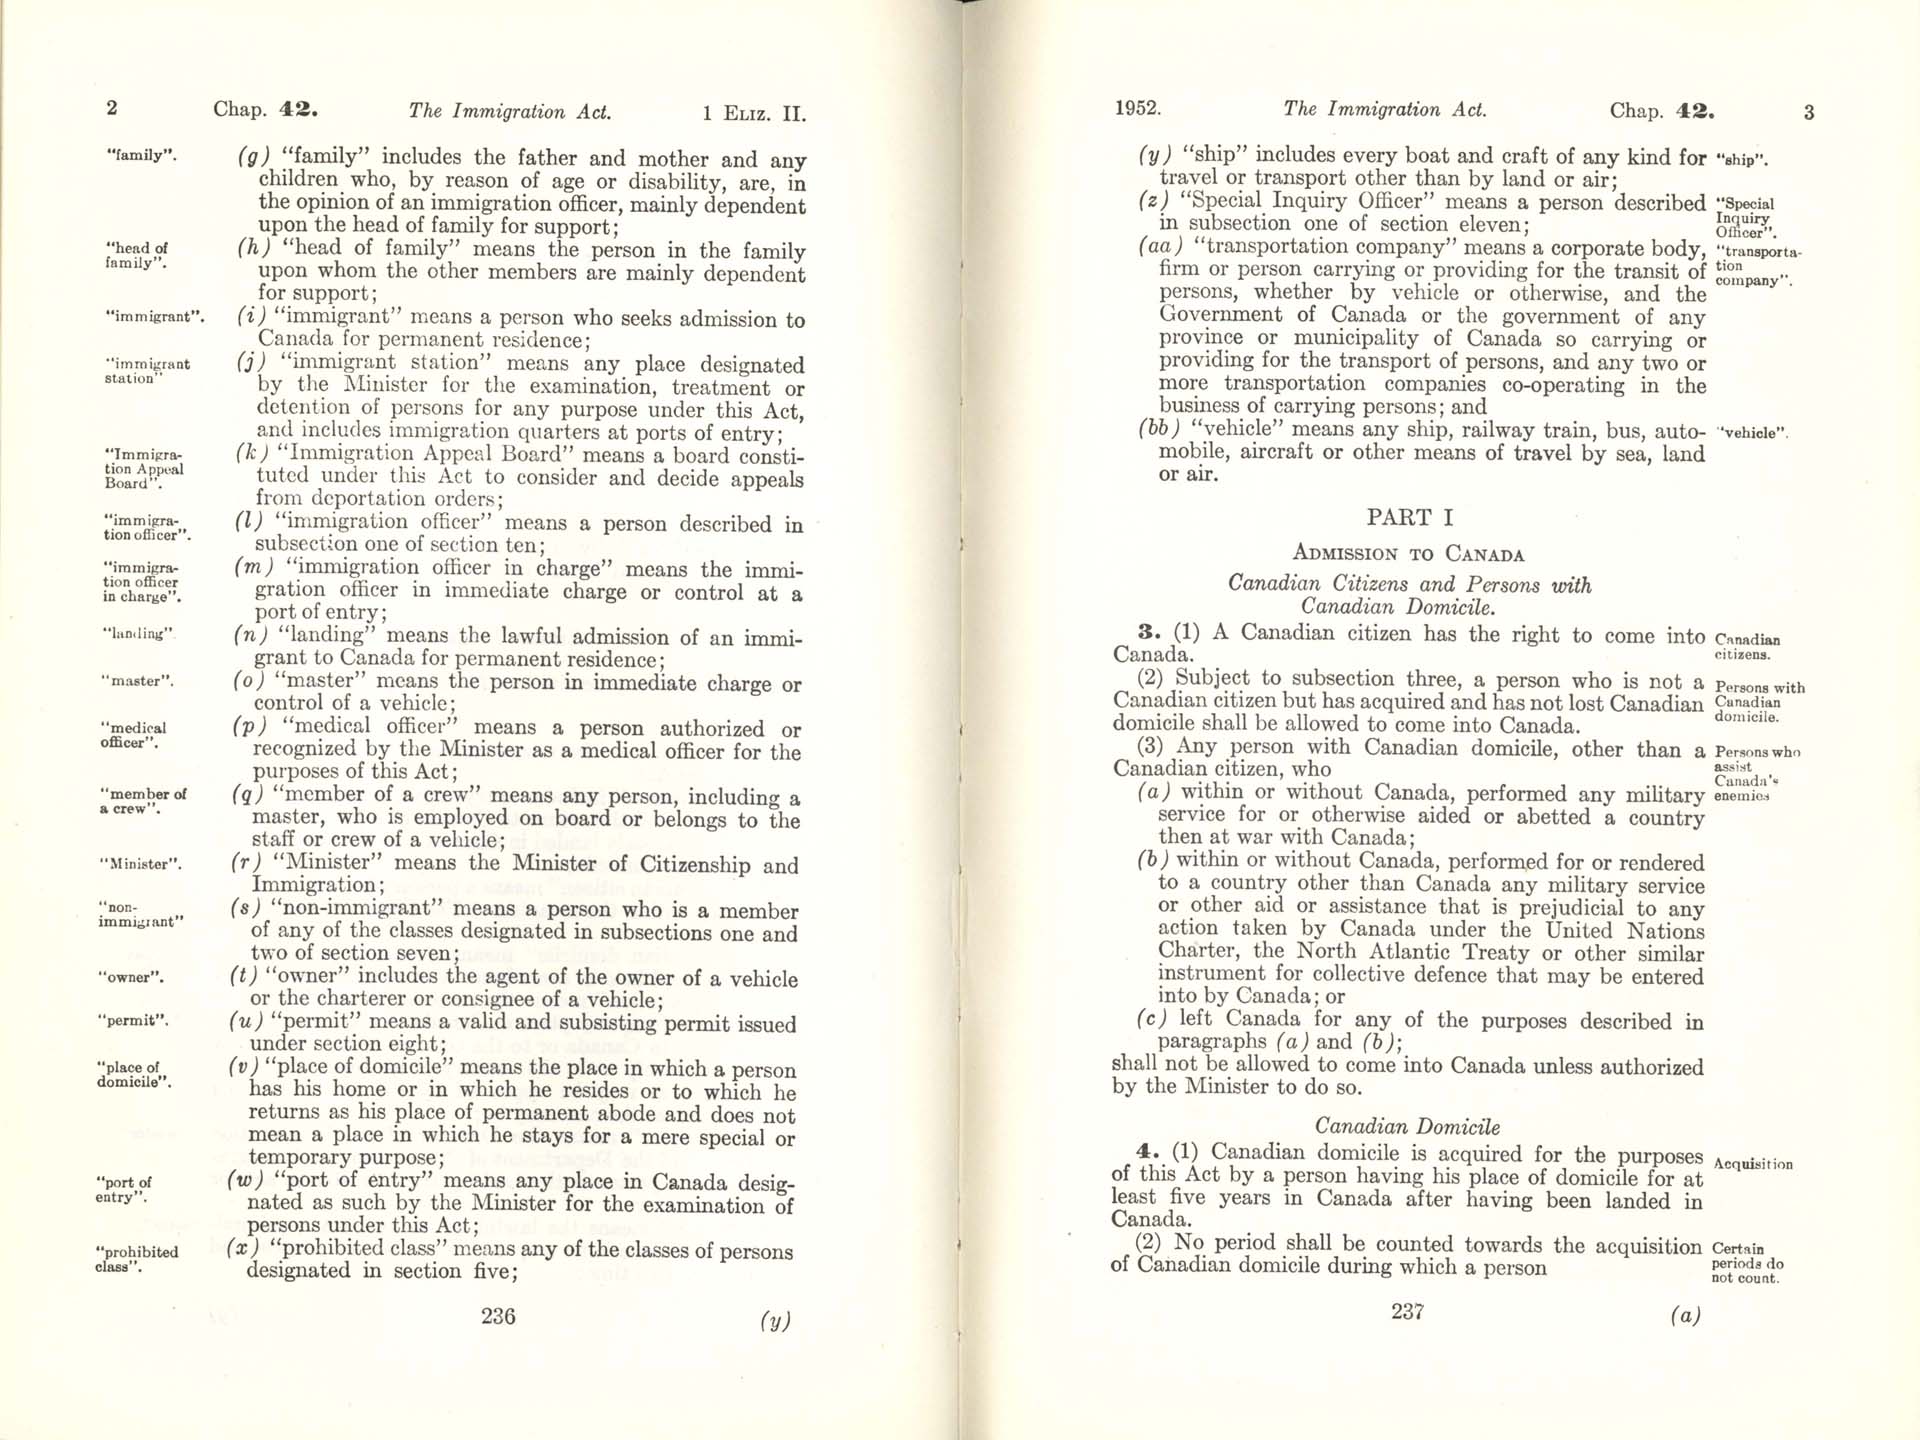 CHAP 42 Page 236, 237 Immigration Act, 1952